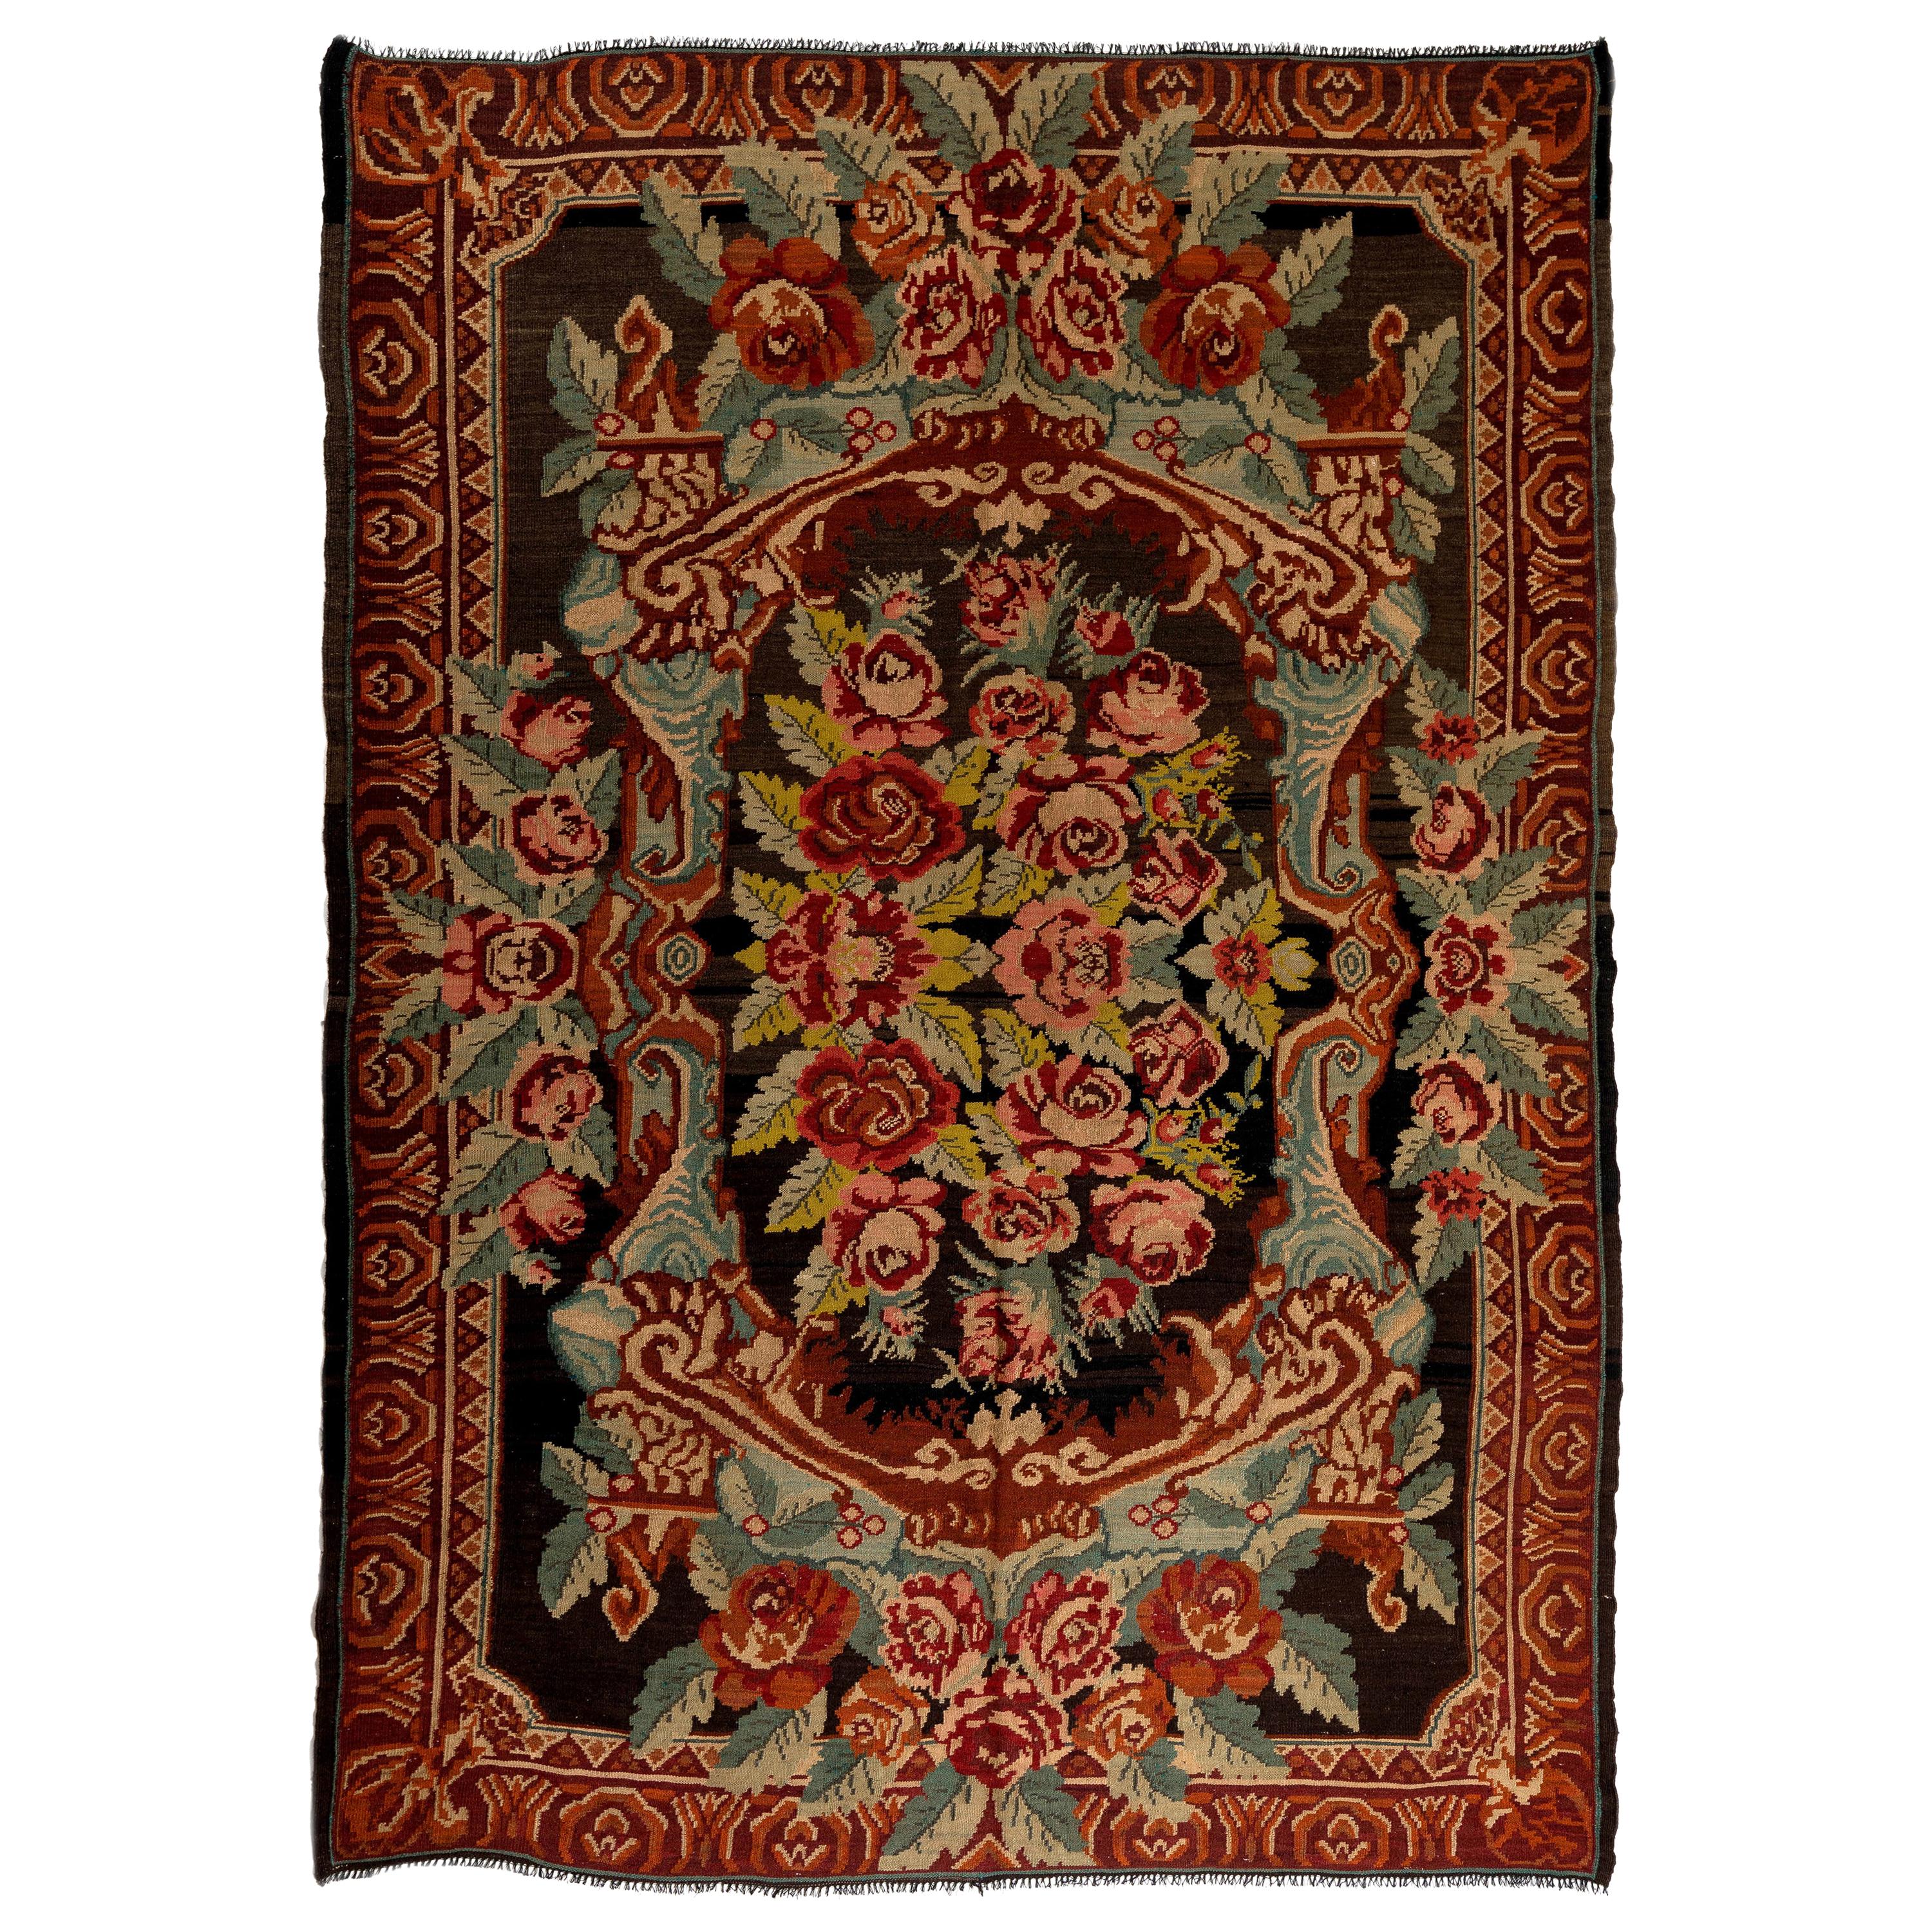 7.5x10.4 Ft Late-20th Century Bessarabian Kilim Rug, Floral Handwoven Tapestry